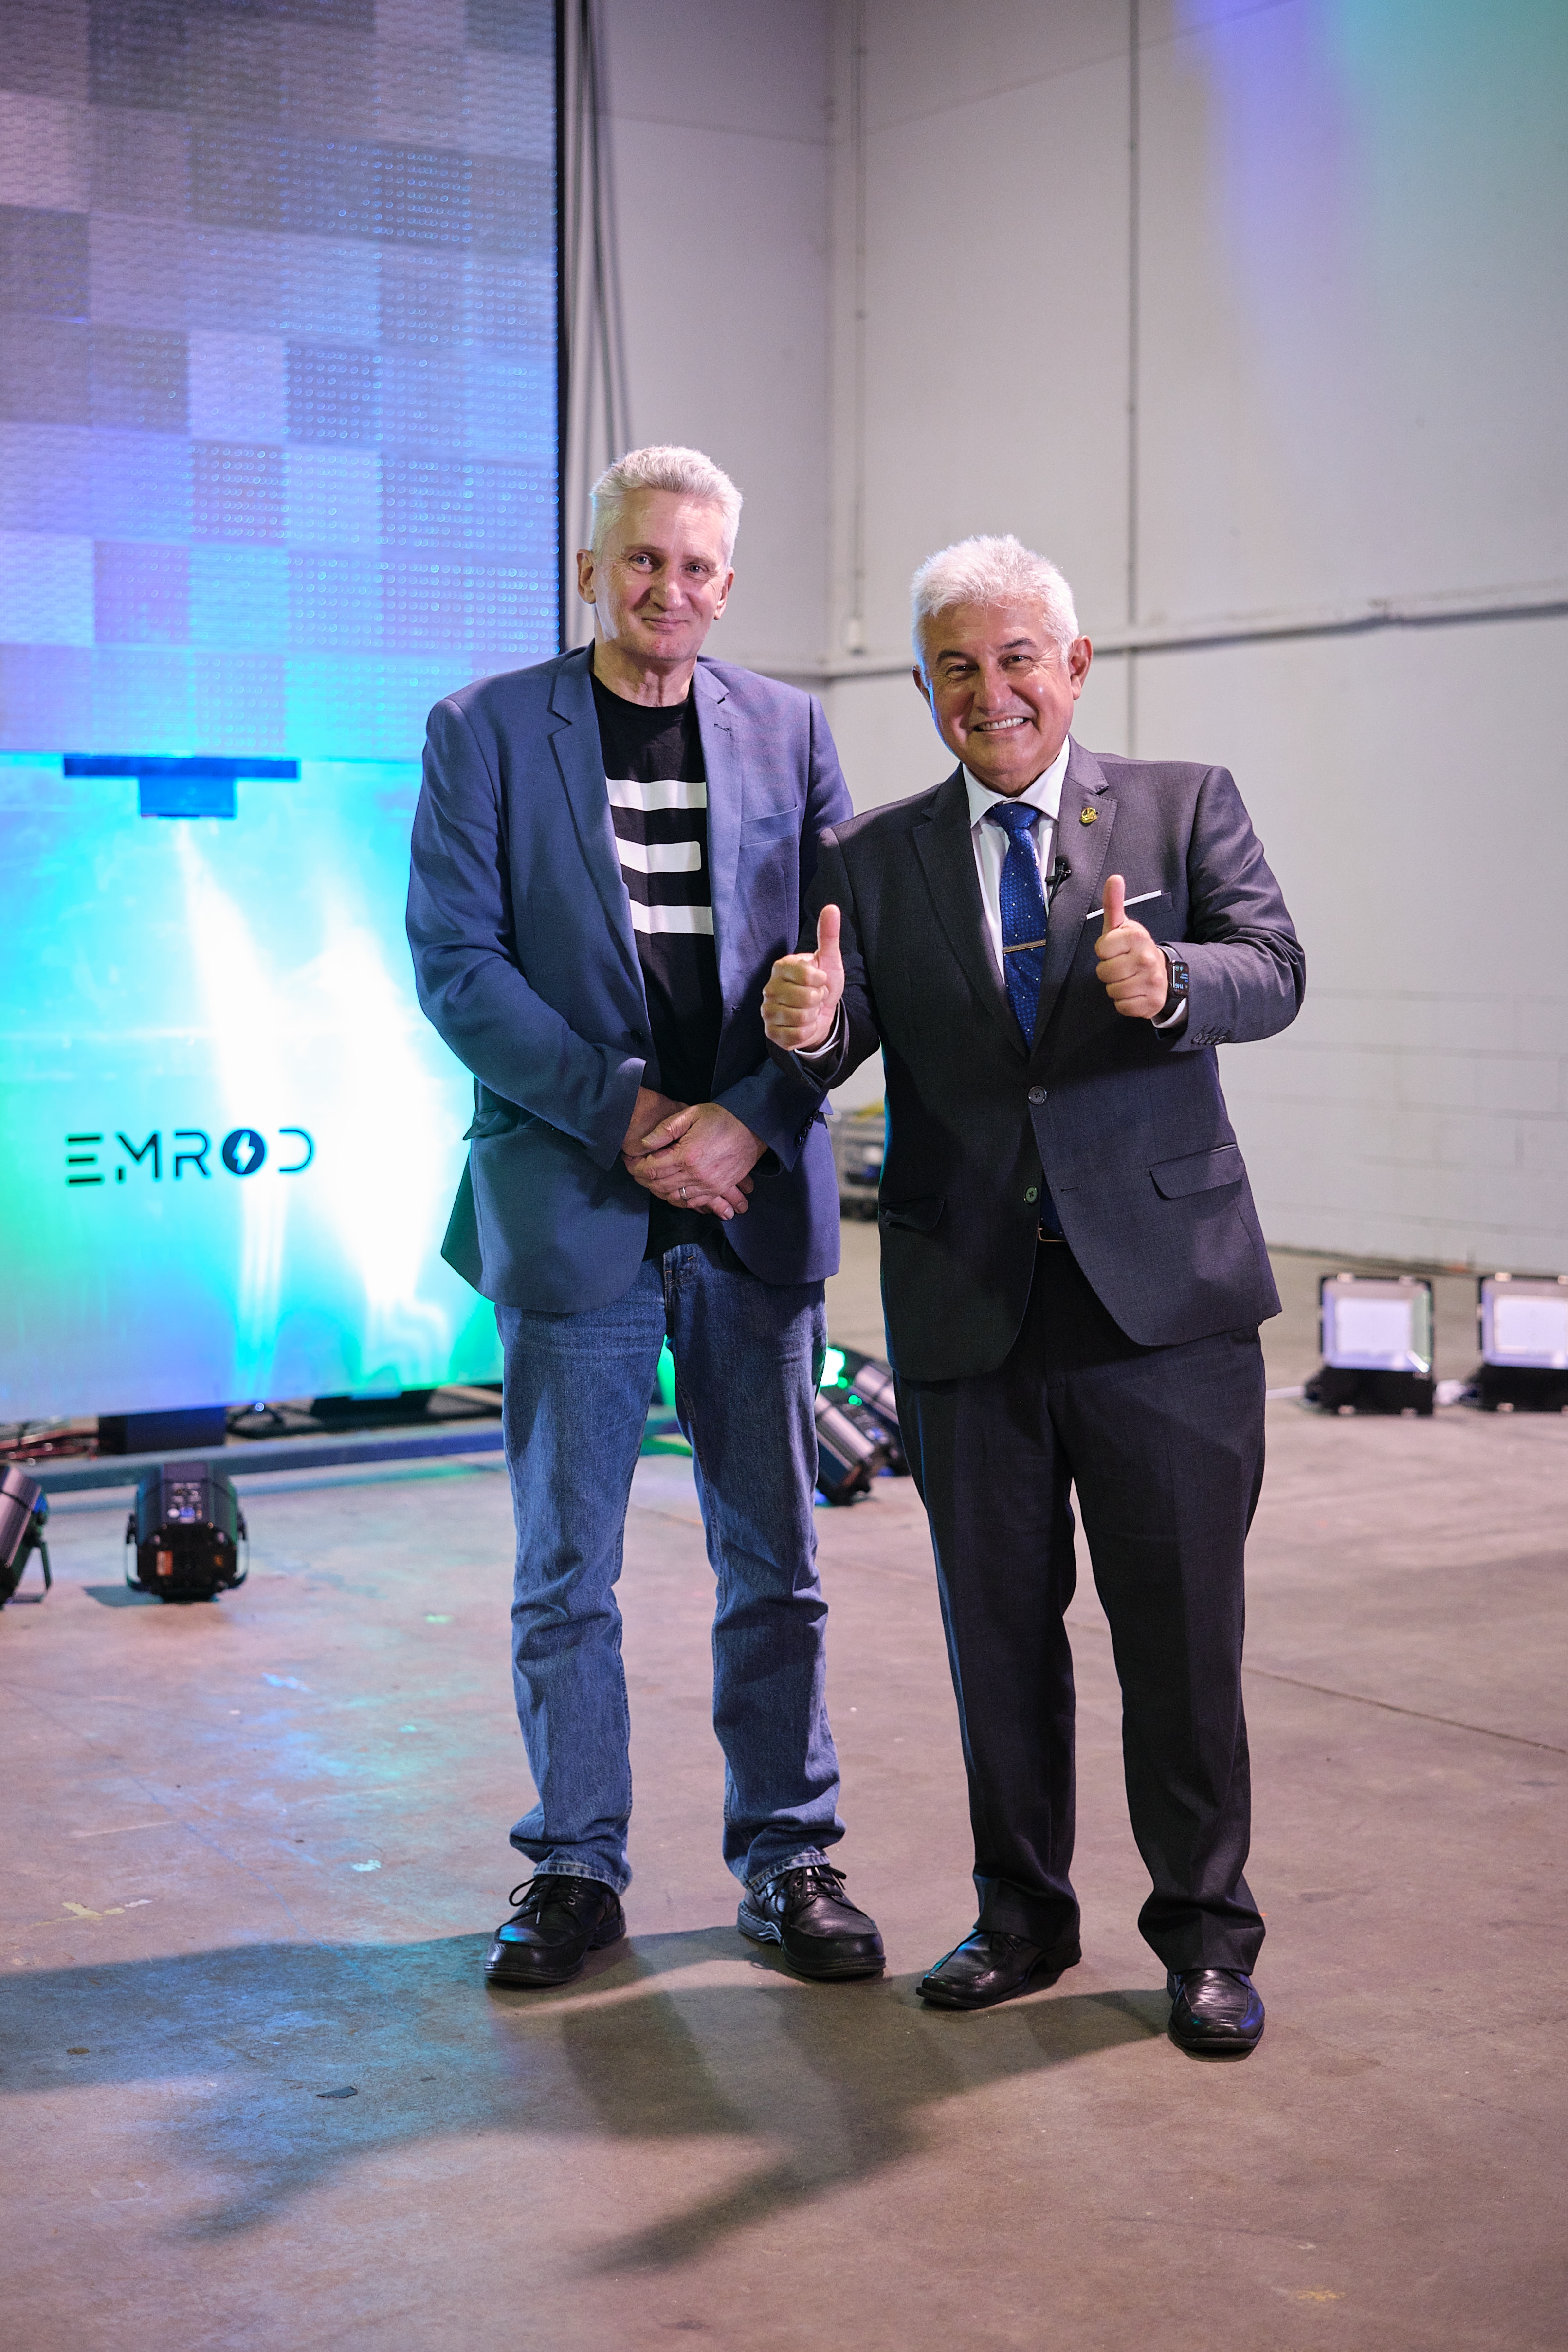 EMROD Chief Scientist Dr Ray Simpkin and Senator and Astronaut Marcos Pontes